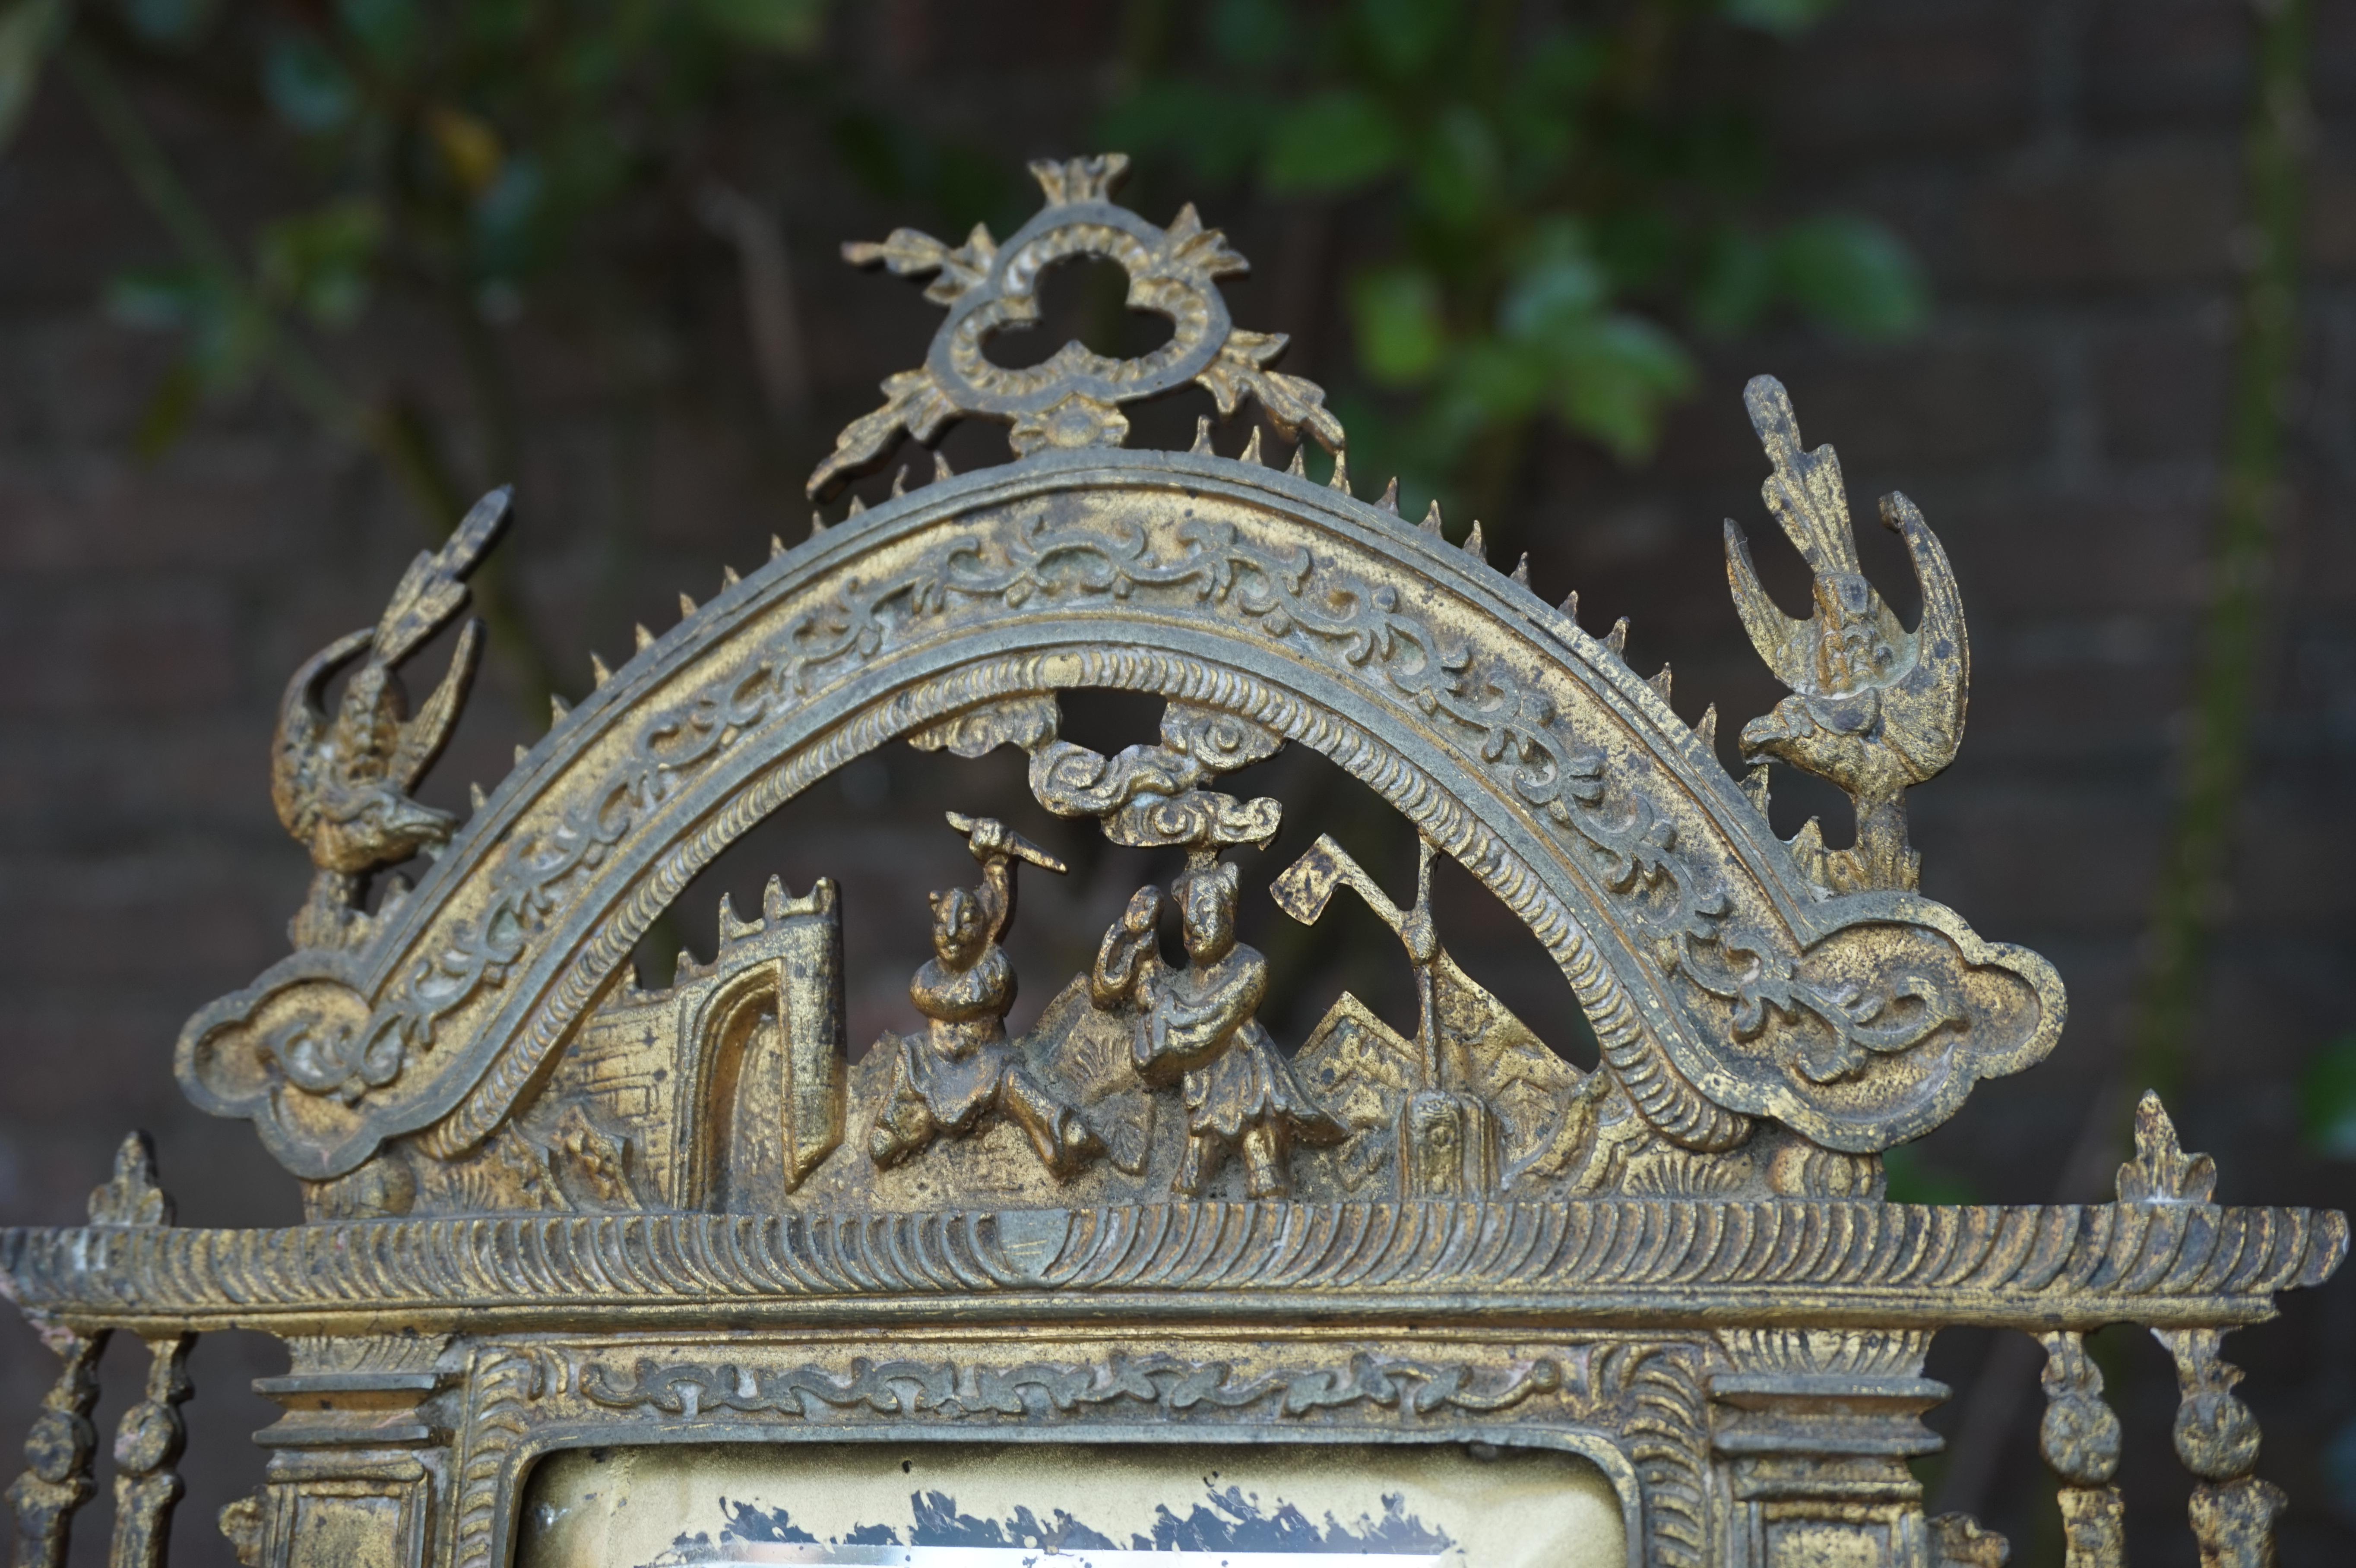 Beveled Late 19th or Early 20th Century Chinese or Chinoiserie Gilt Ormolu Table Mirror For Sale